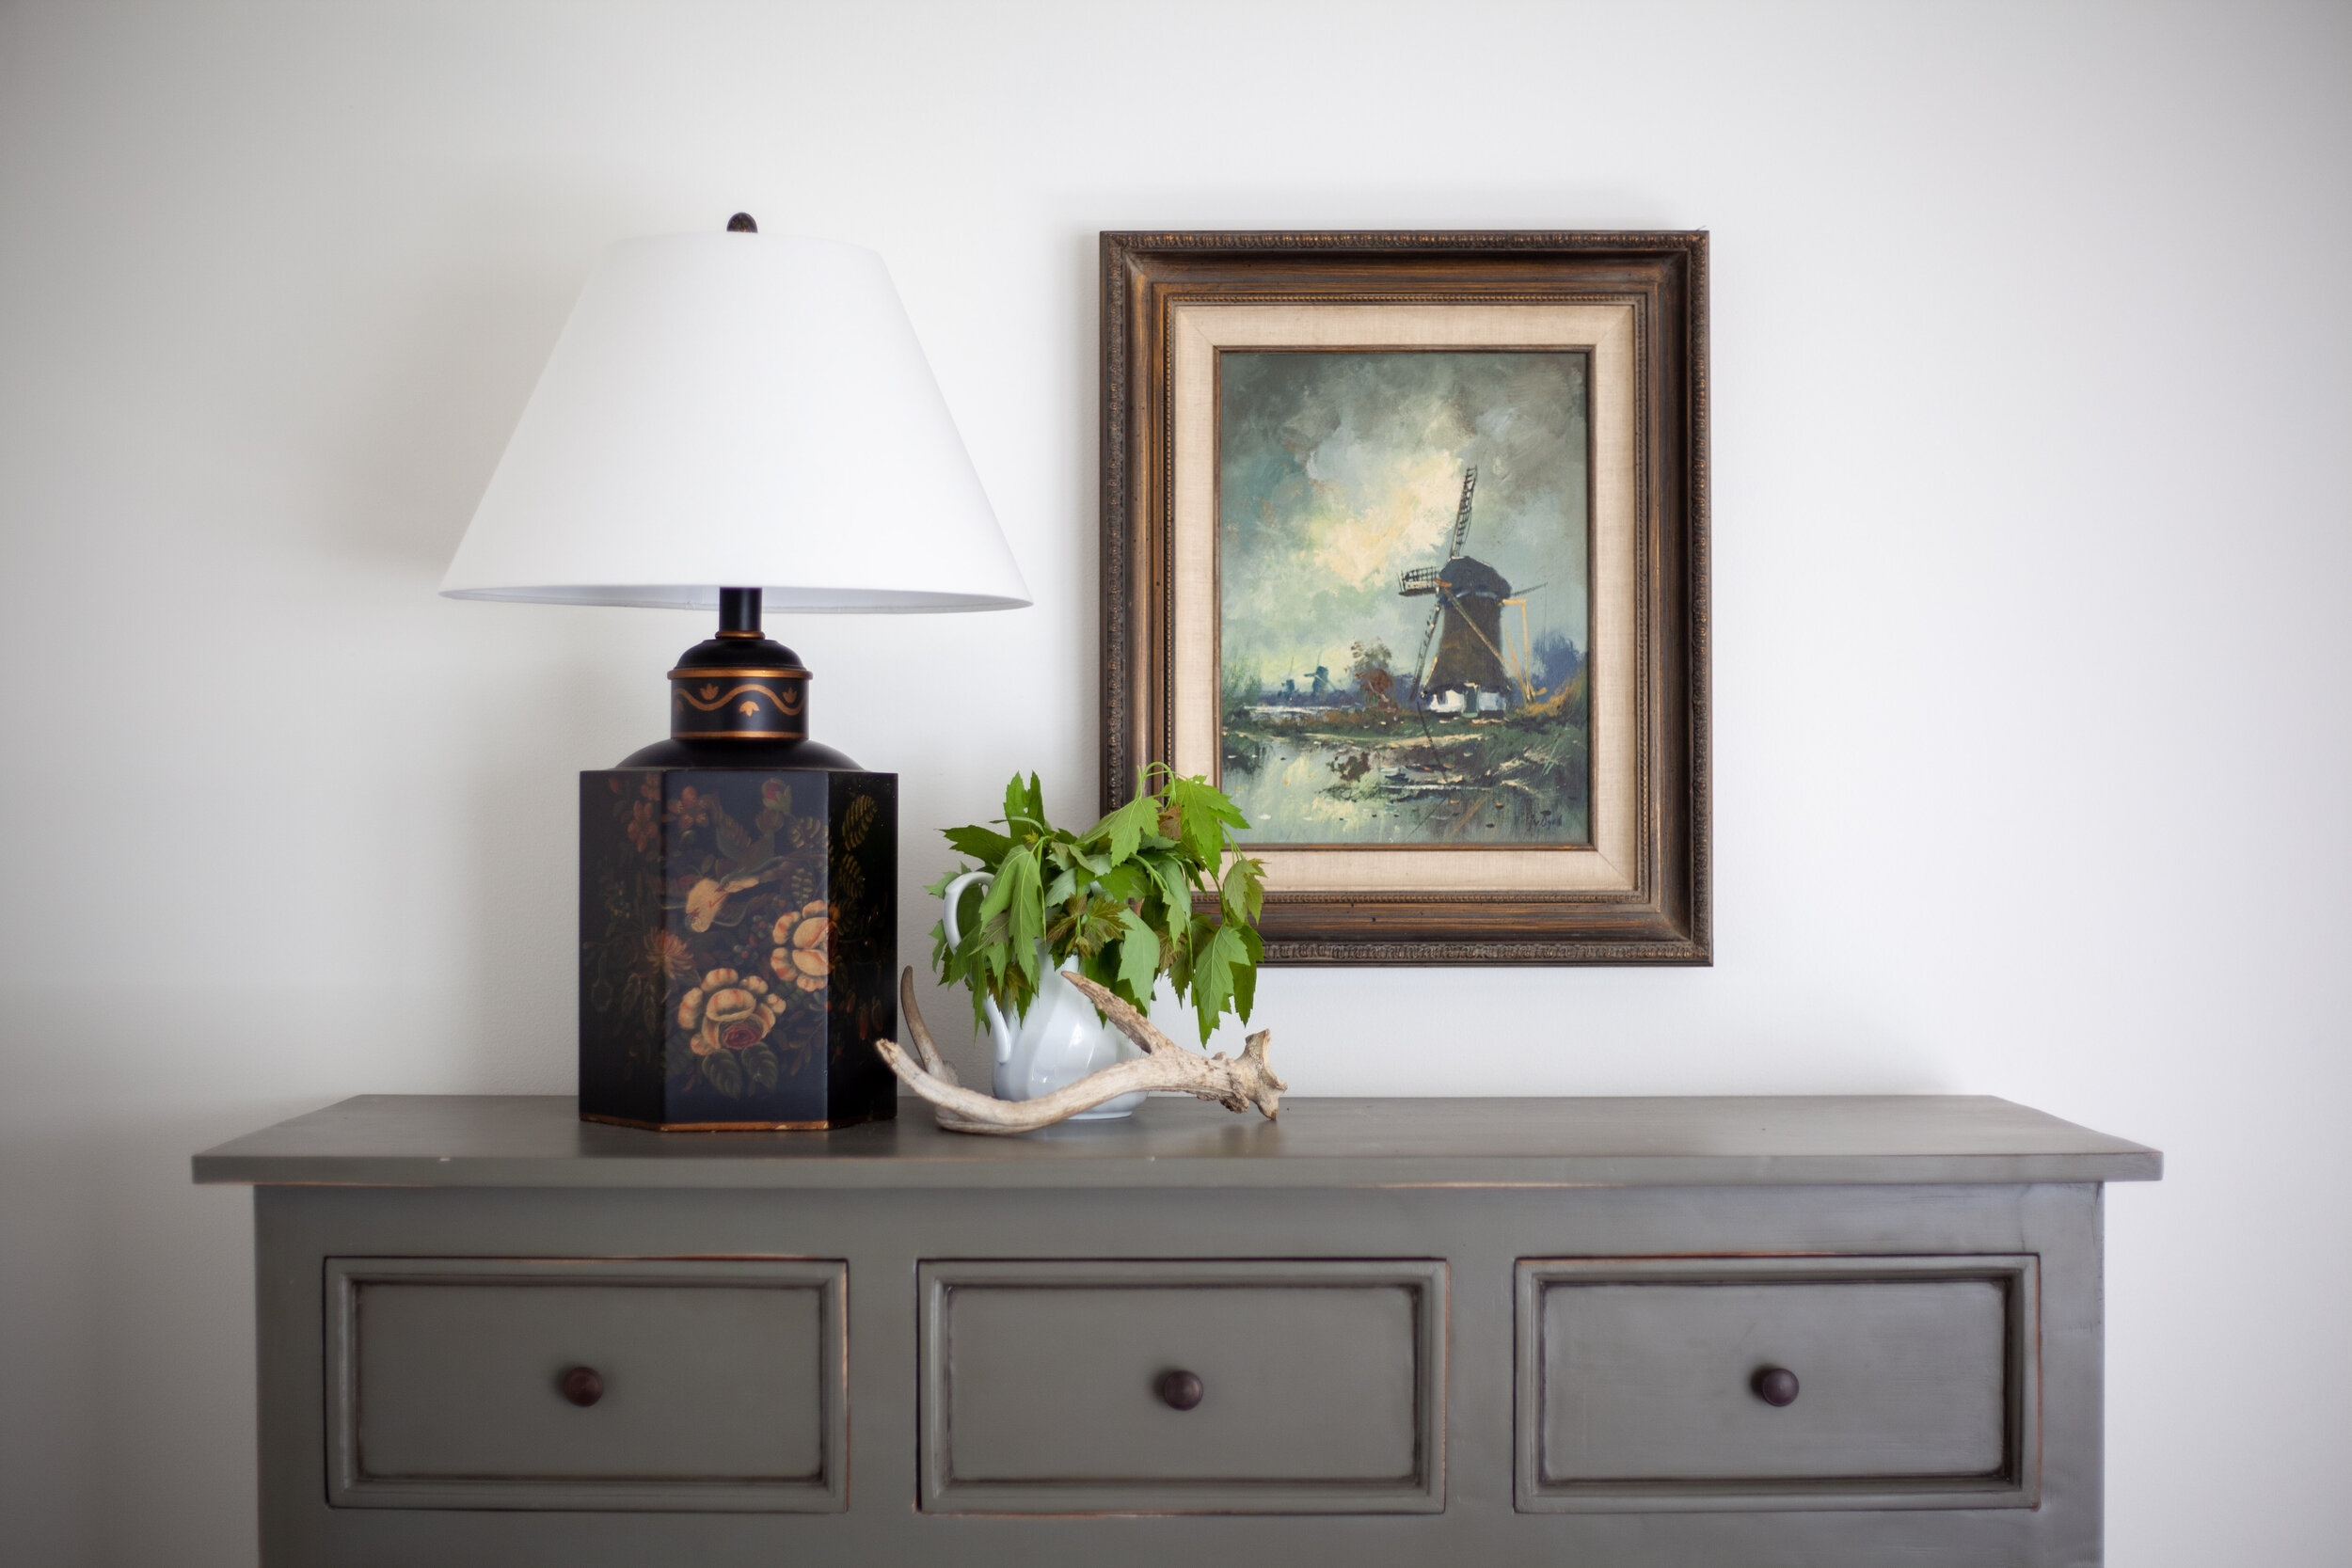 Jeremy - I am loving this vintage lamp! It’s perfect in our little vignette on top of our dresser.